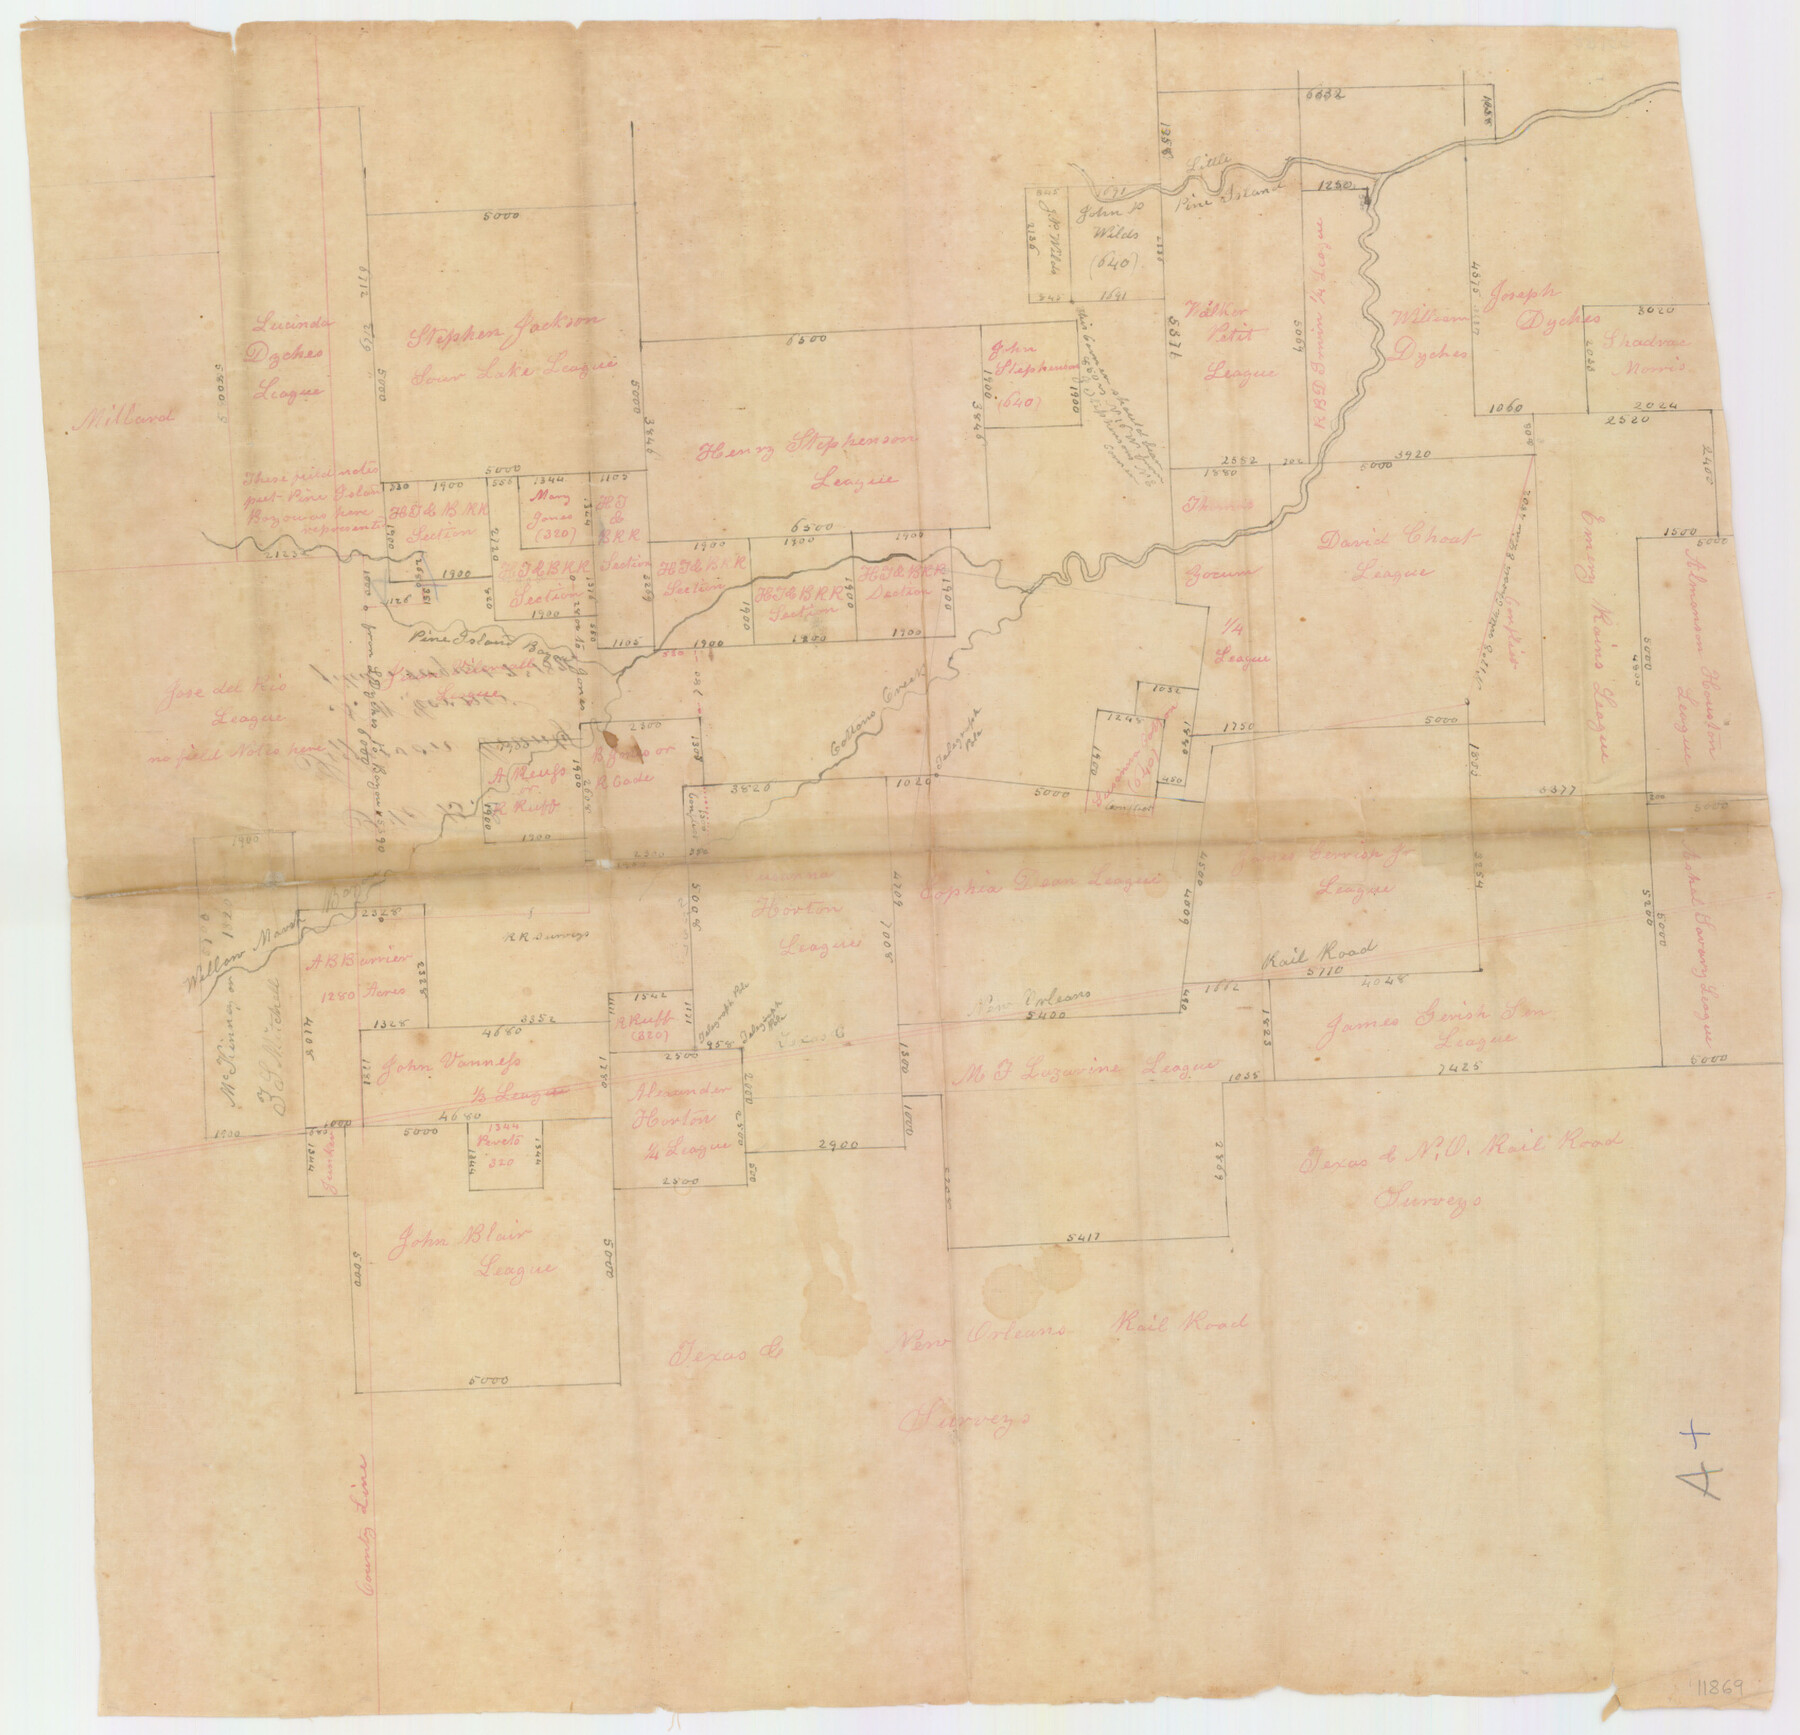 11869, Jefferson County Sketch File 15b, General Map Collection